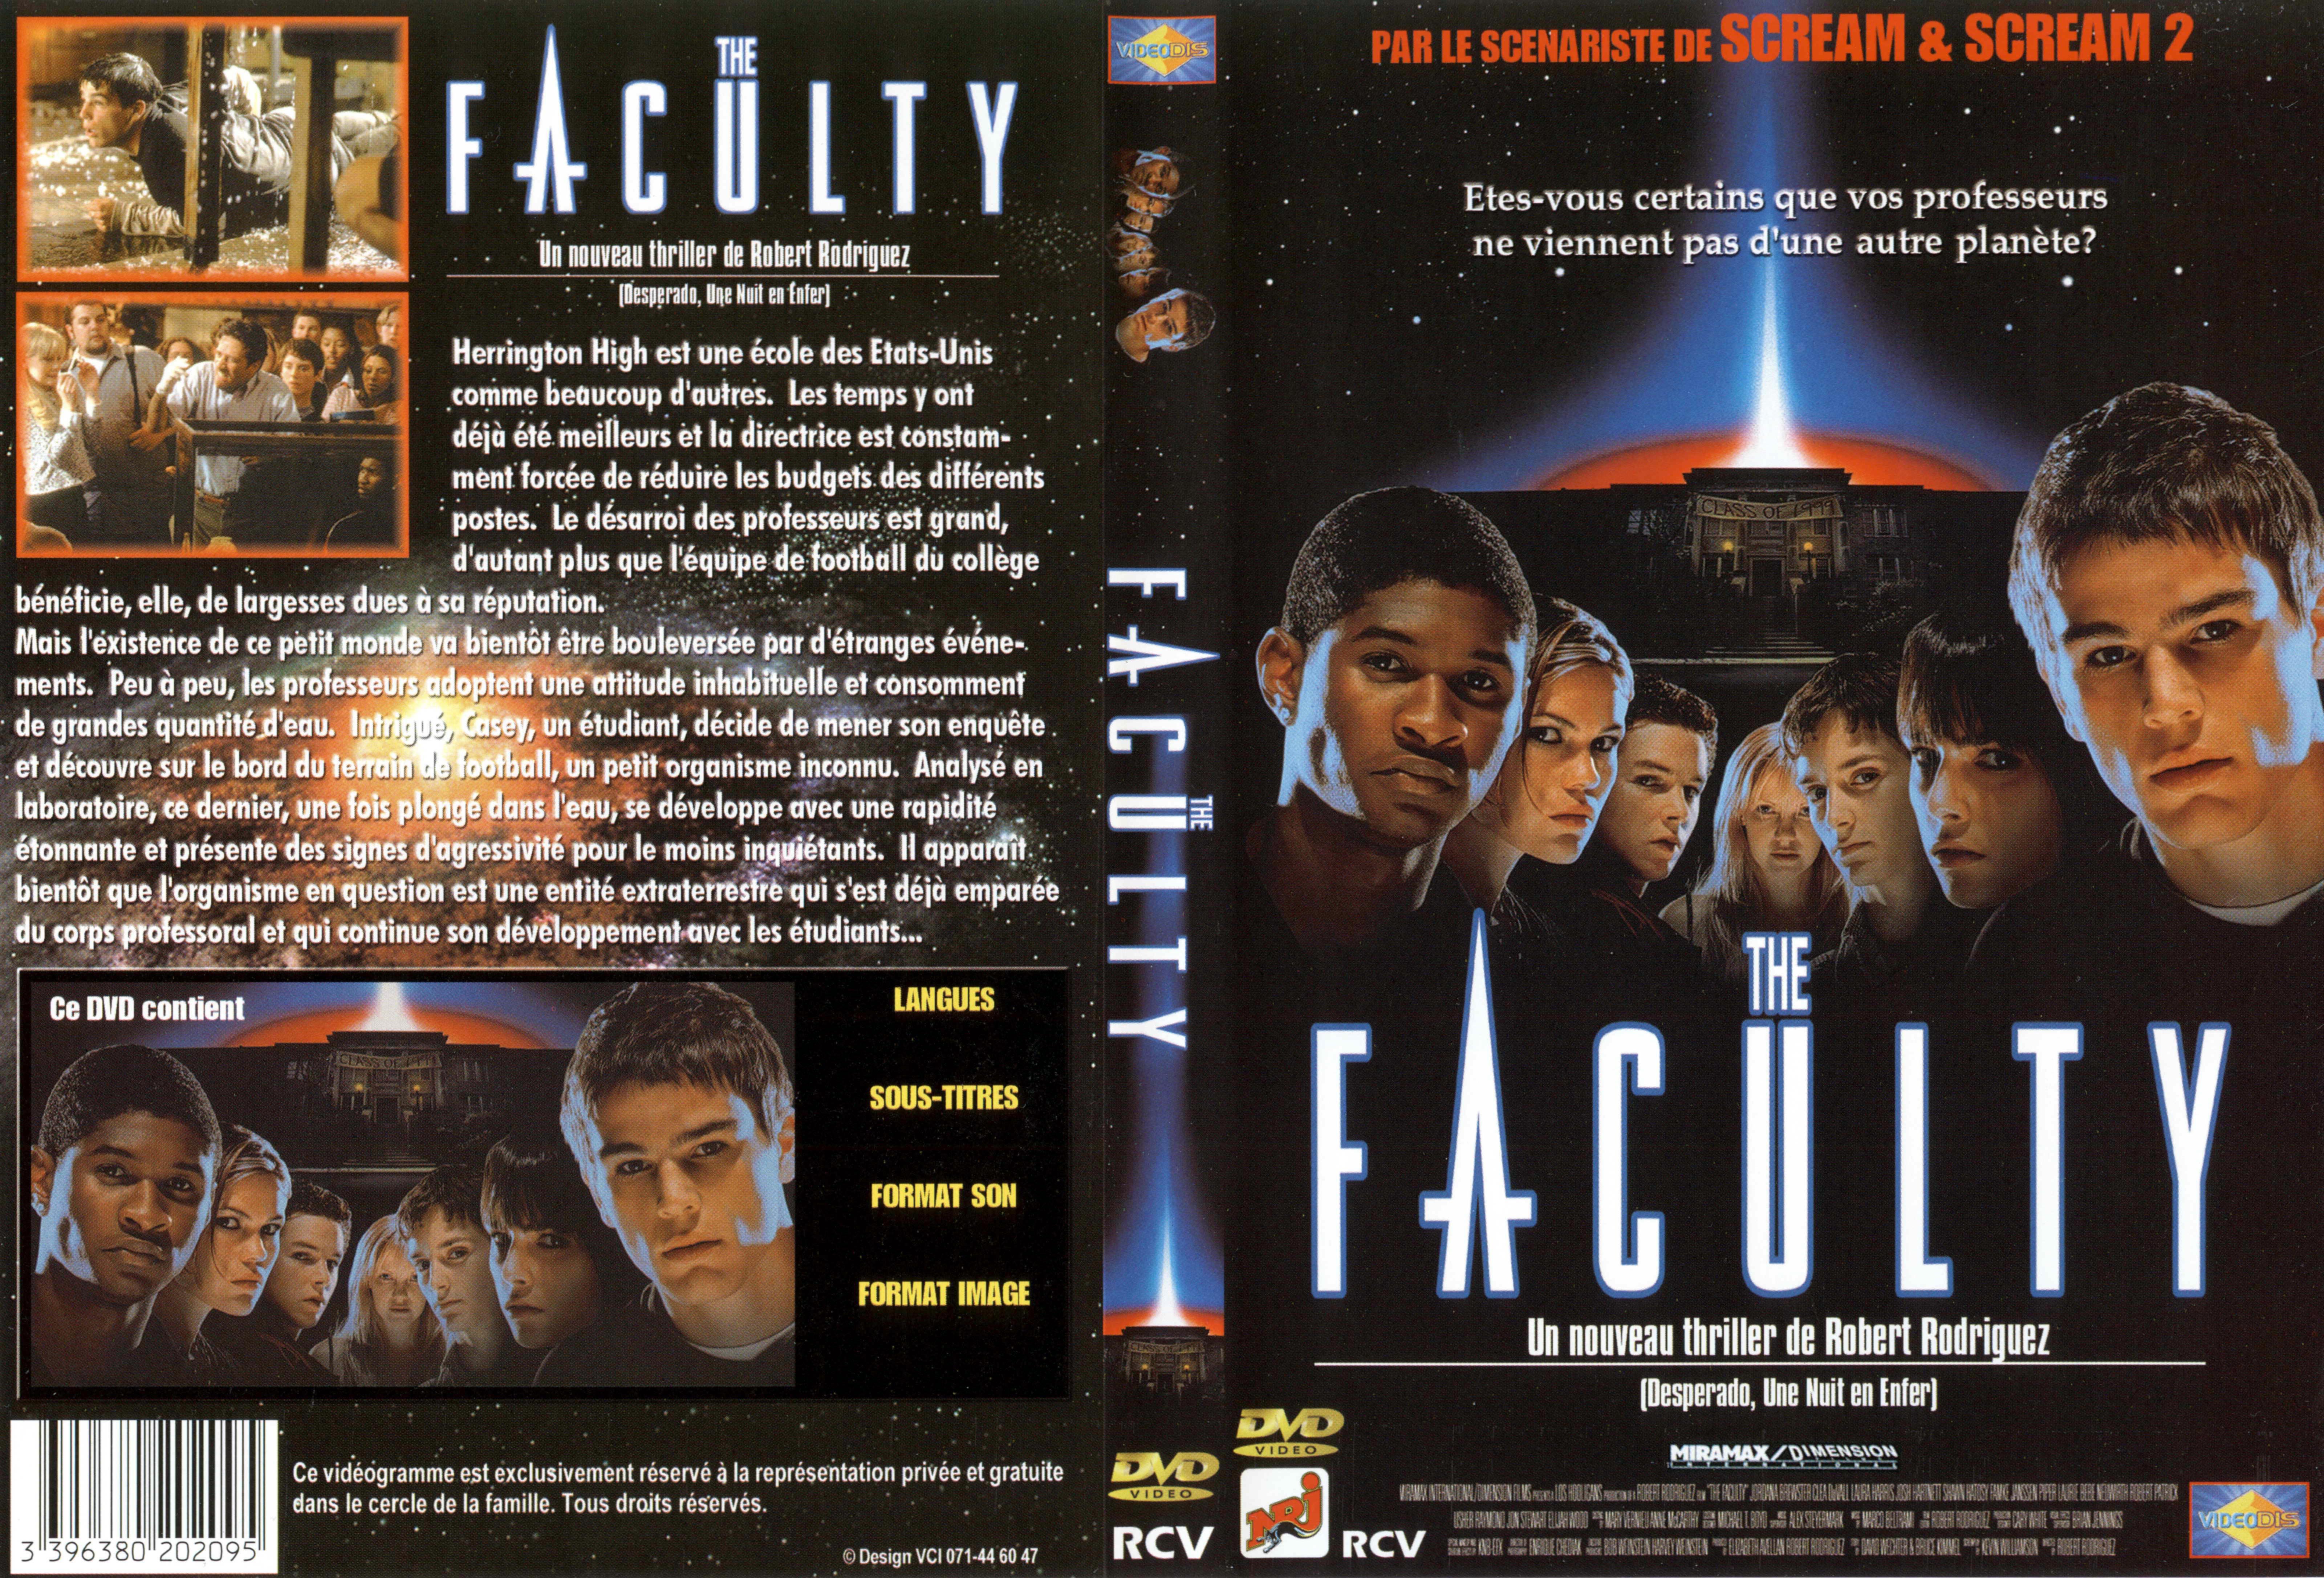 Jaquette DVD The faculty v2